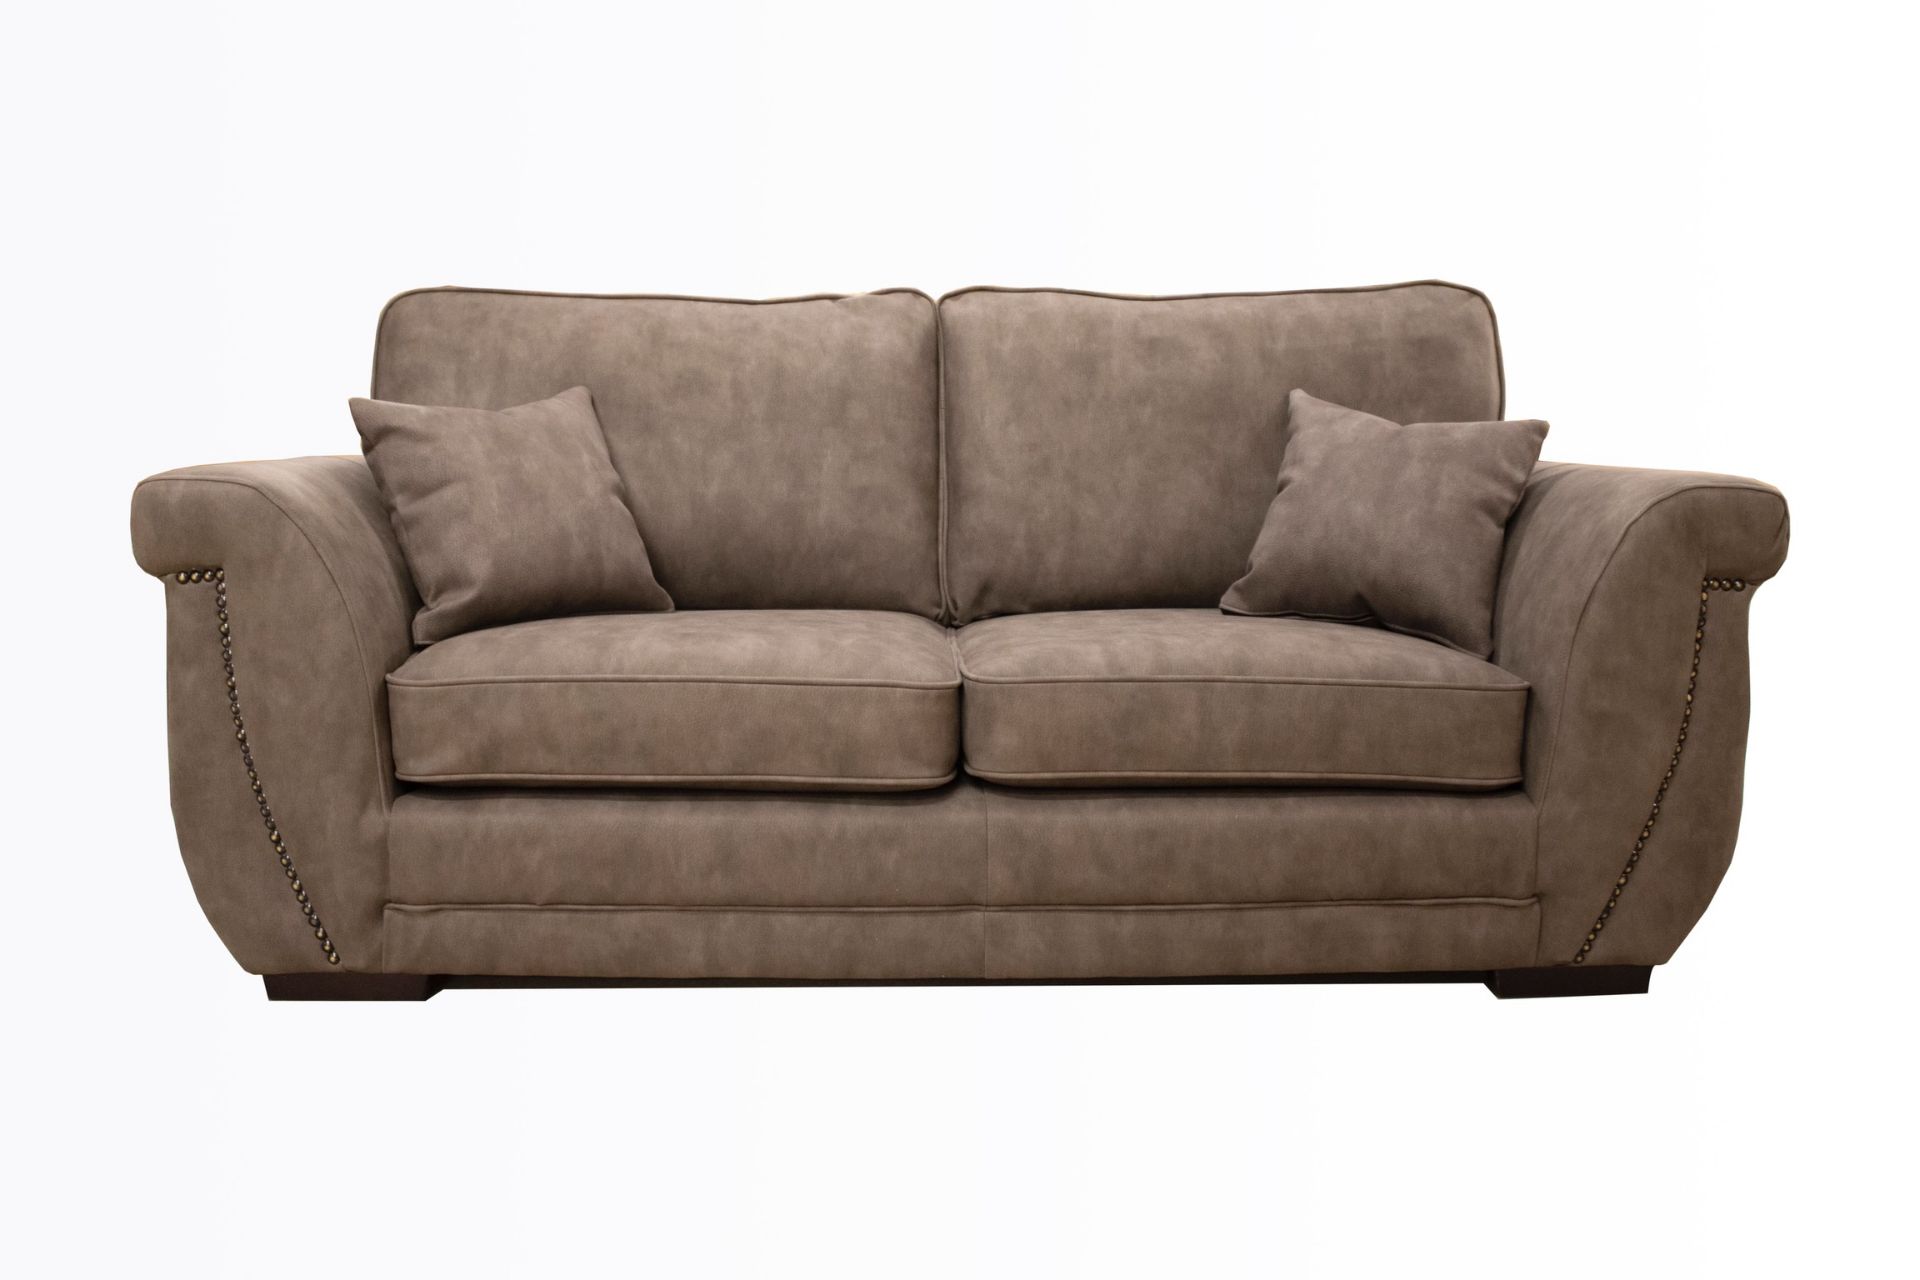 Brand new luxe 3 seater plus 2 seater fabric sofas